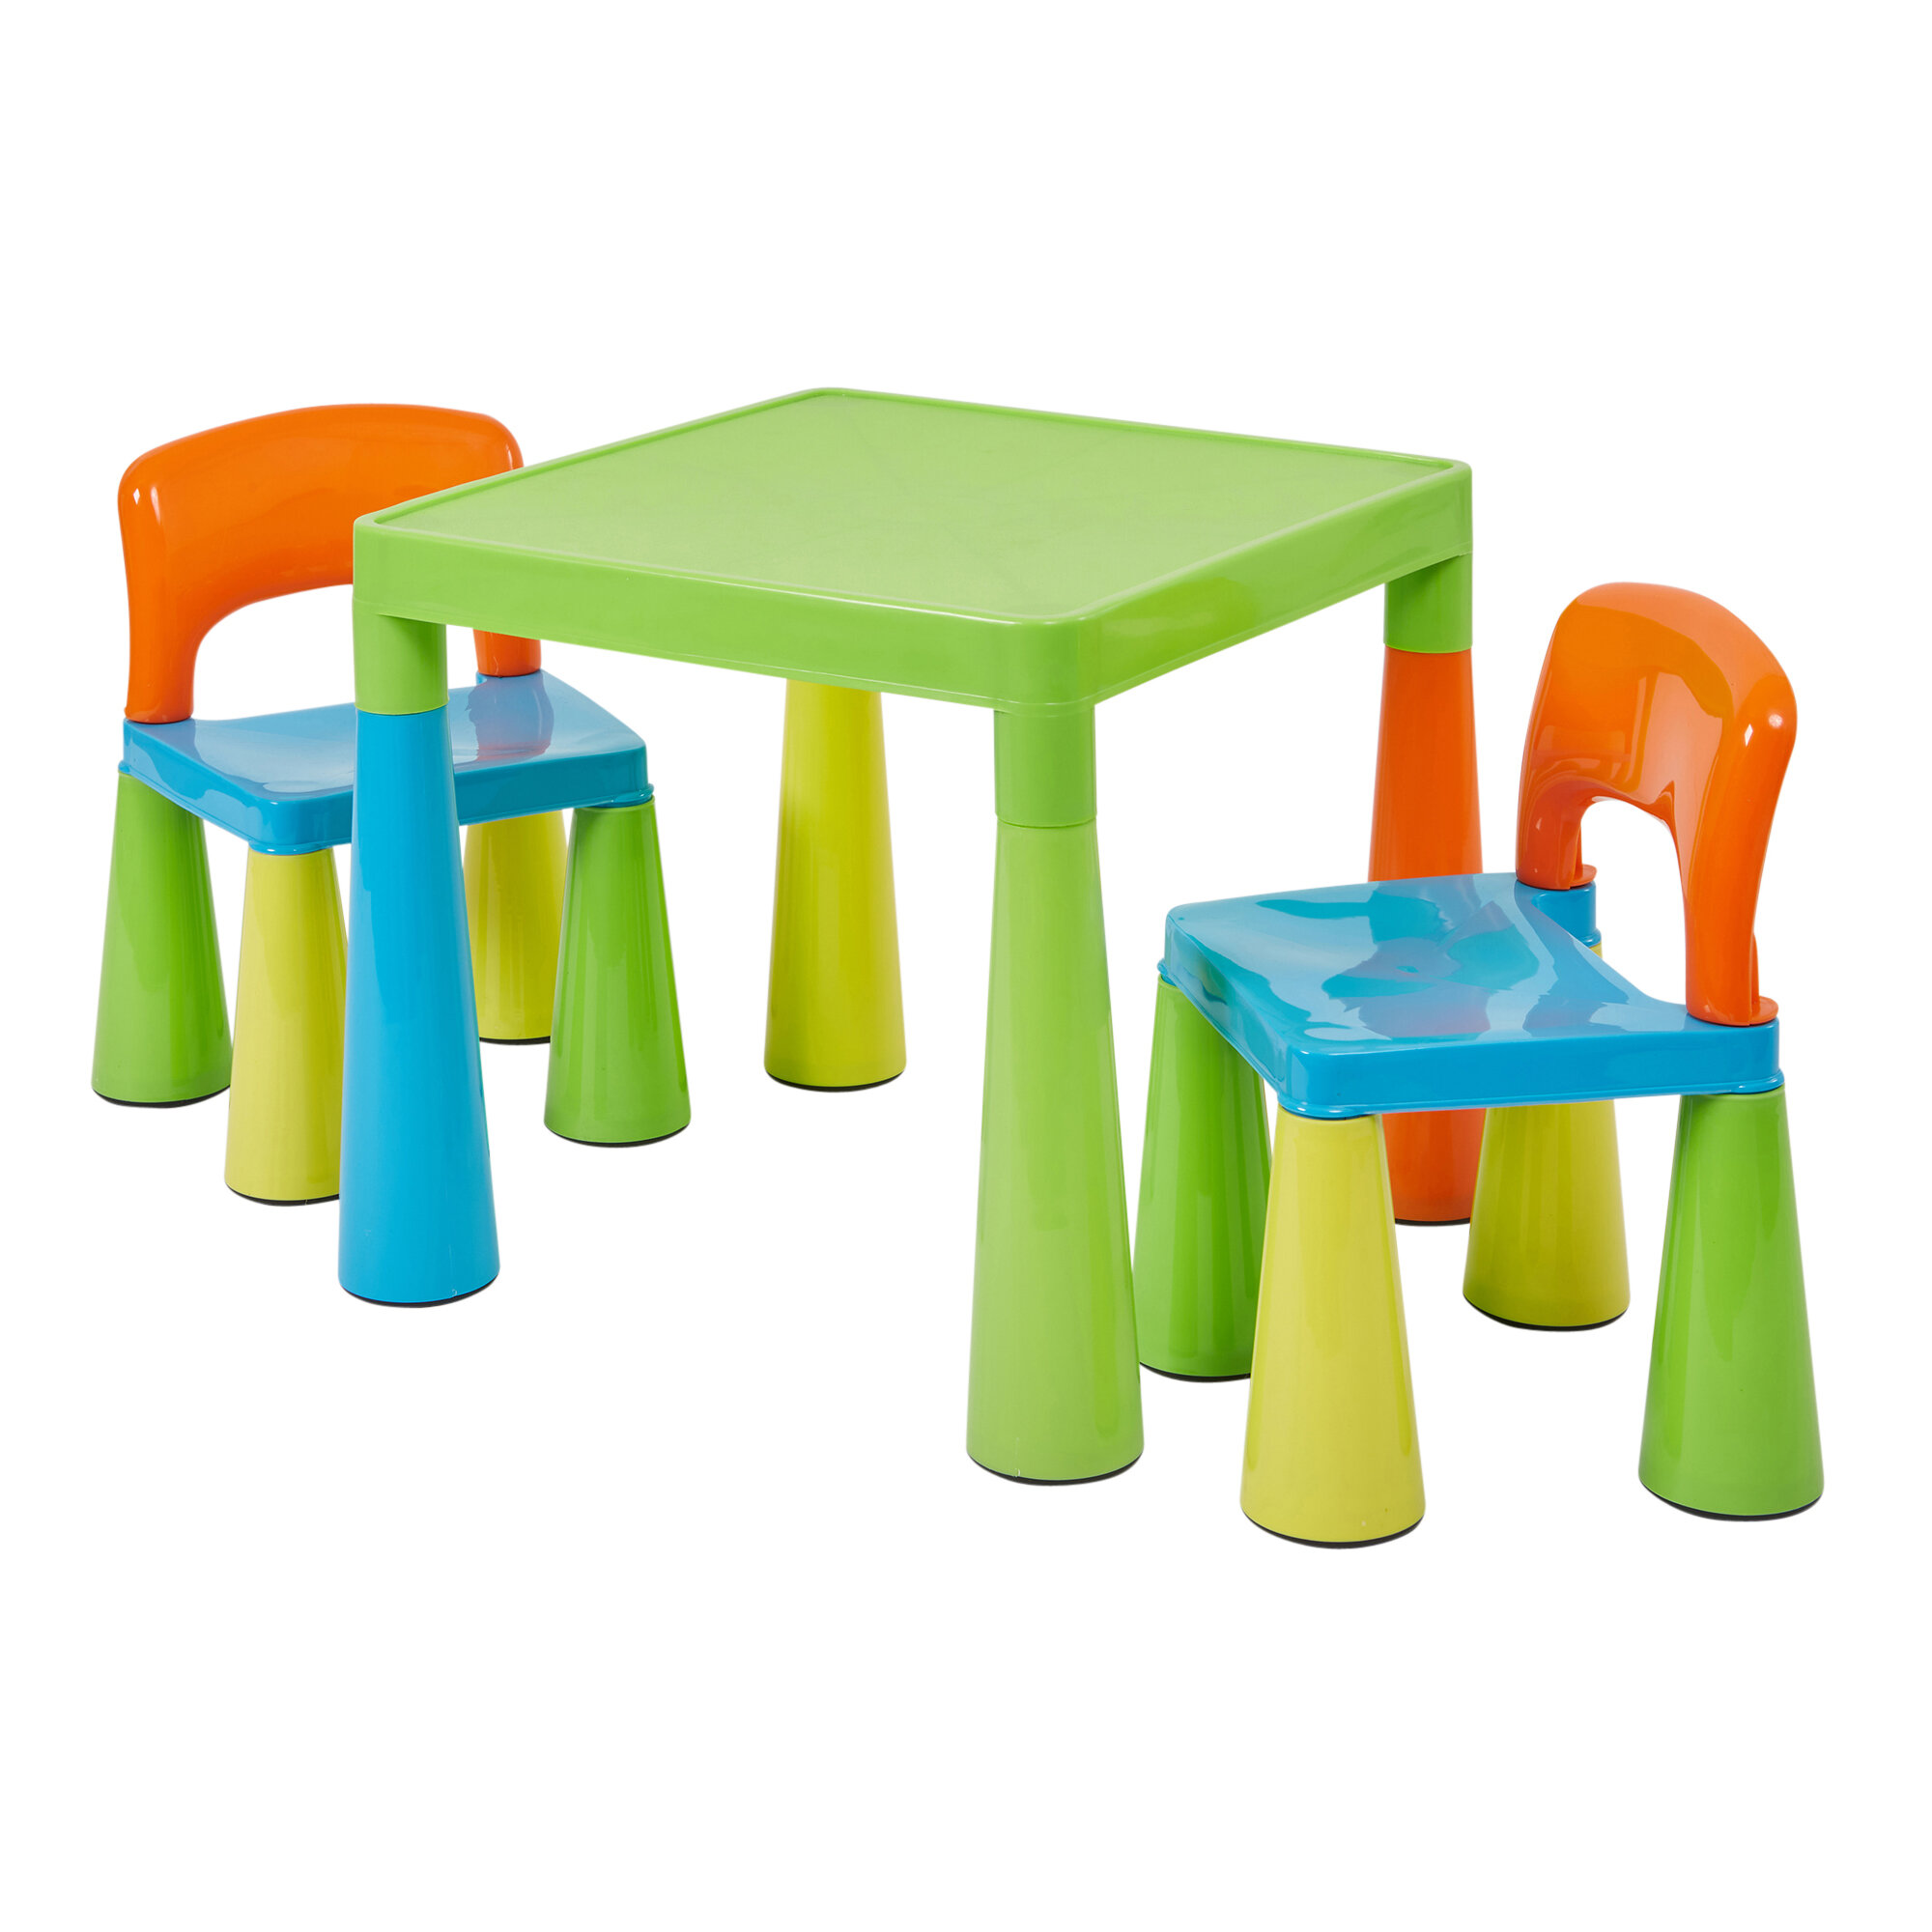 Conard Kids 18 Piece Square Play / Activity Table and Chair Set